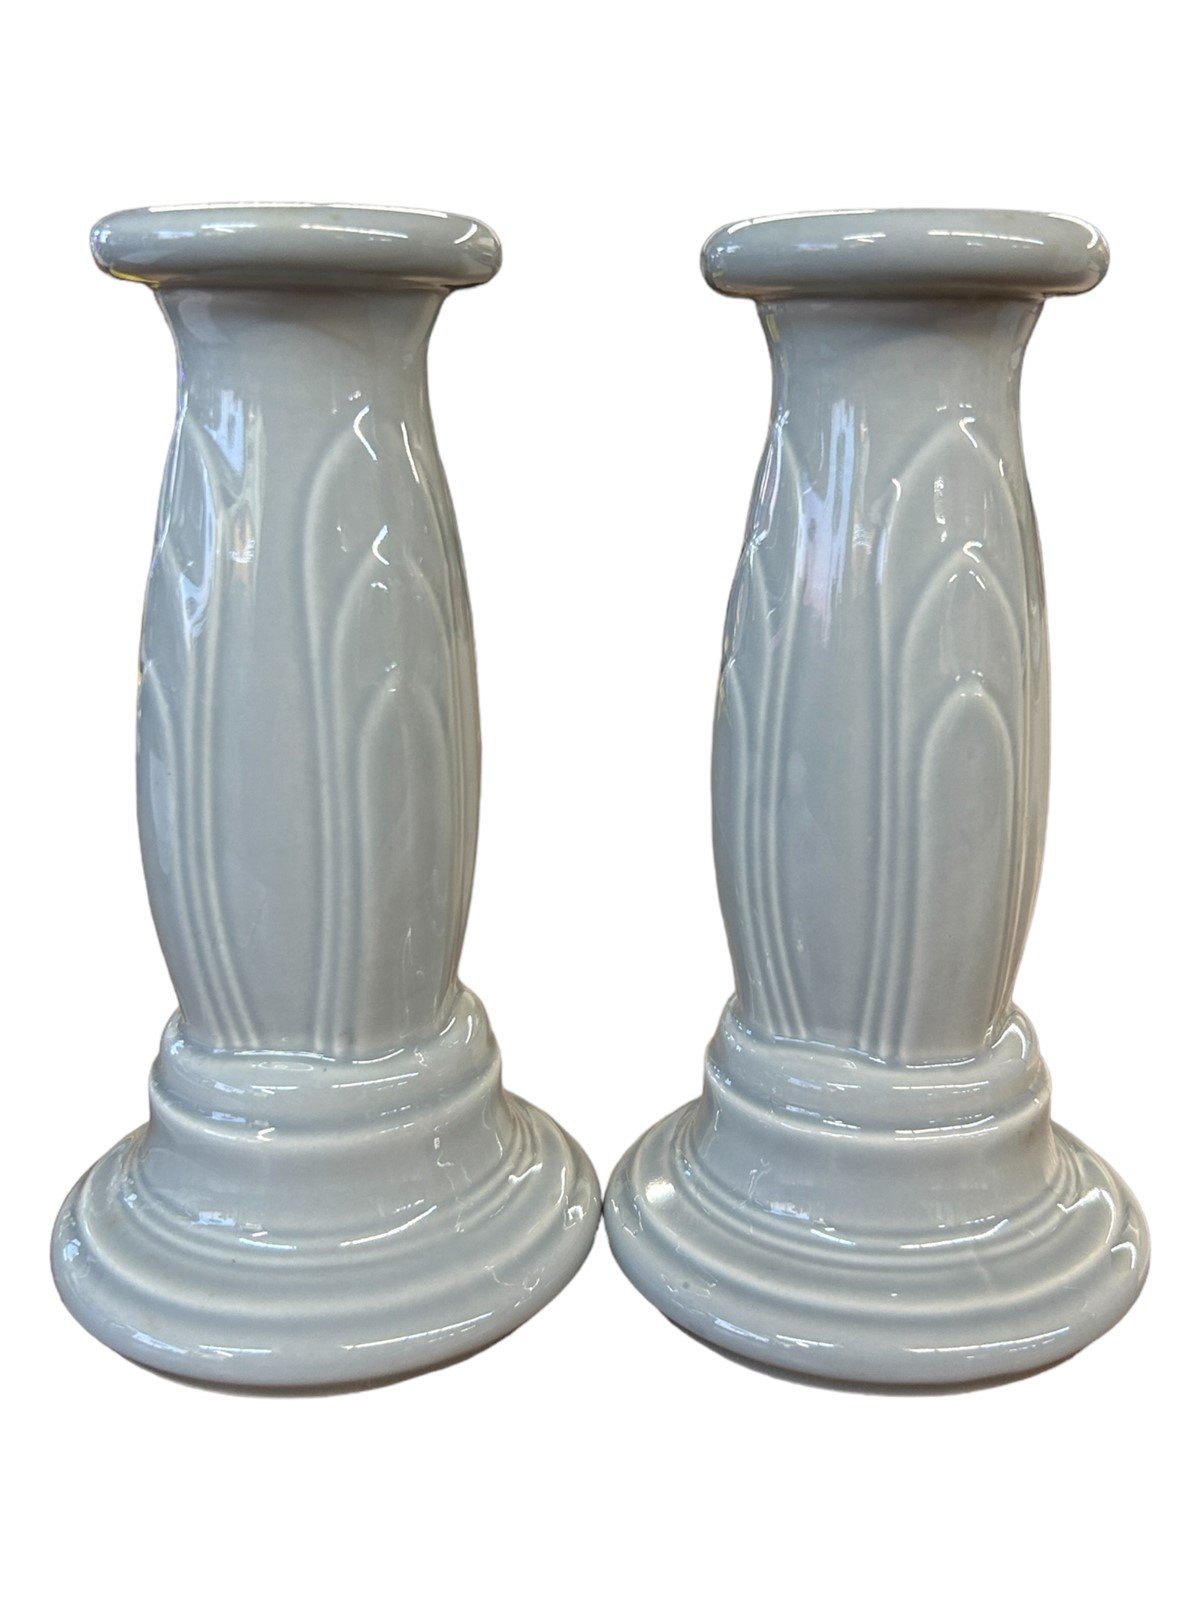 Tapered Candlestick Holders Fiesta Ware Gray Y2K Homer Laughlin HLC Grey Ceramic